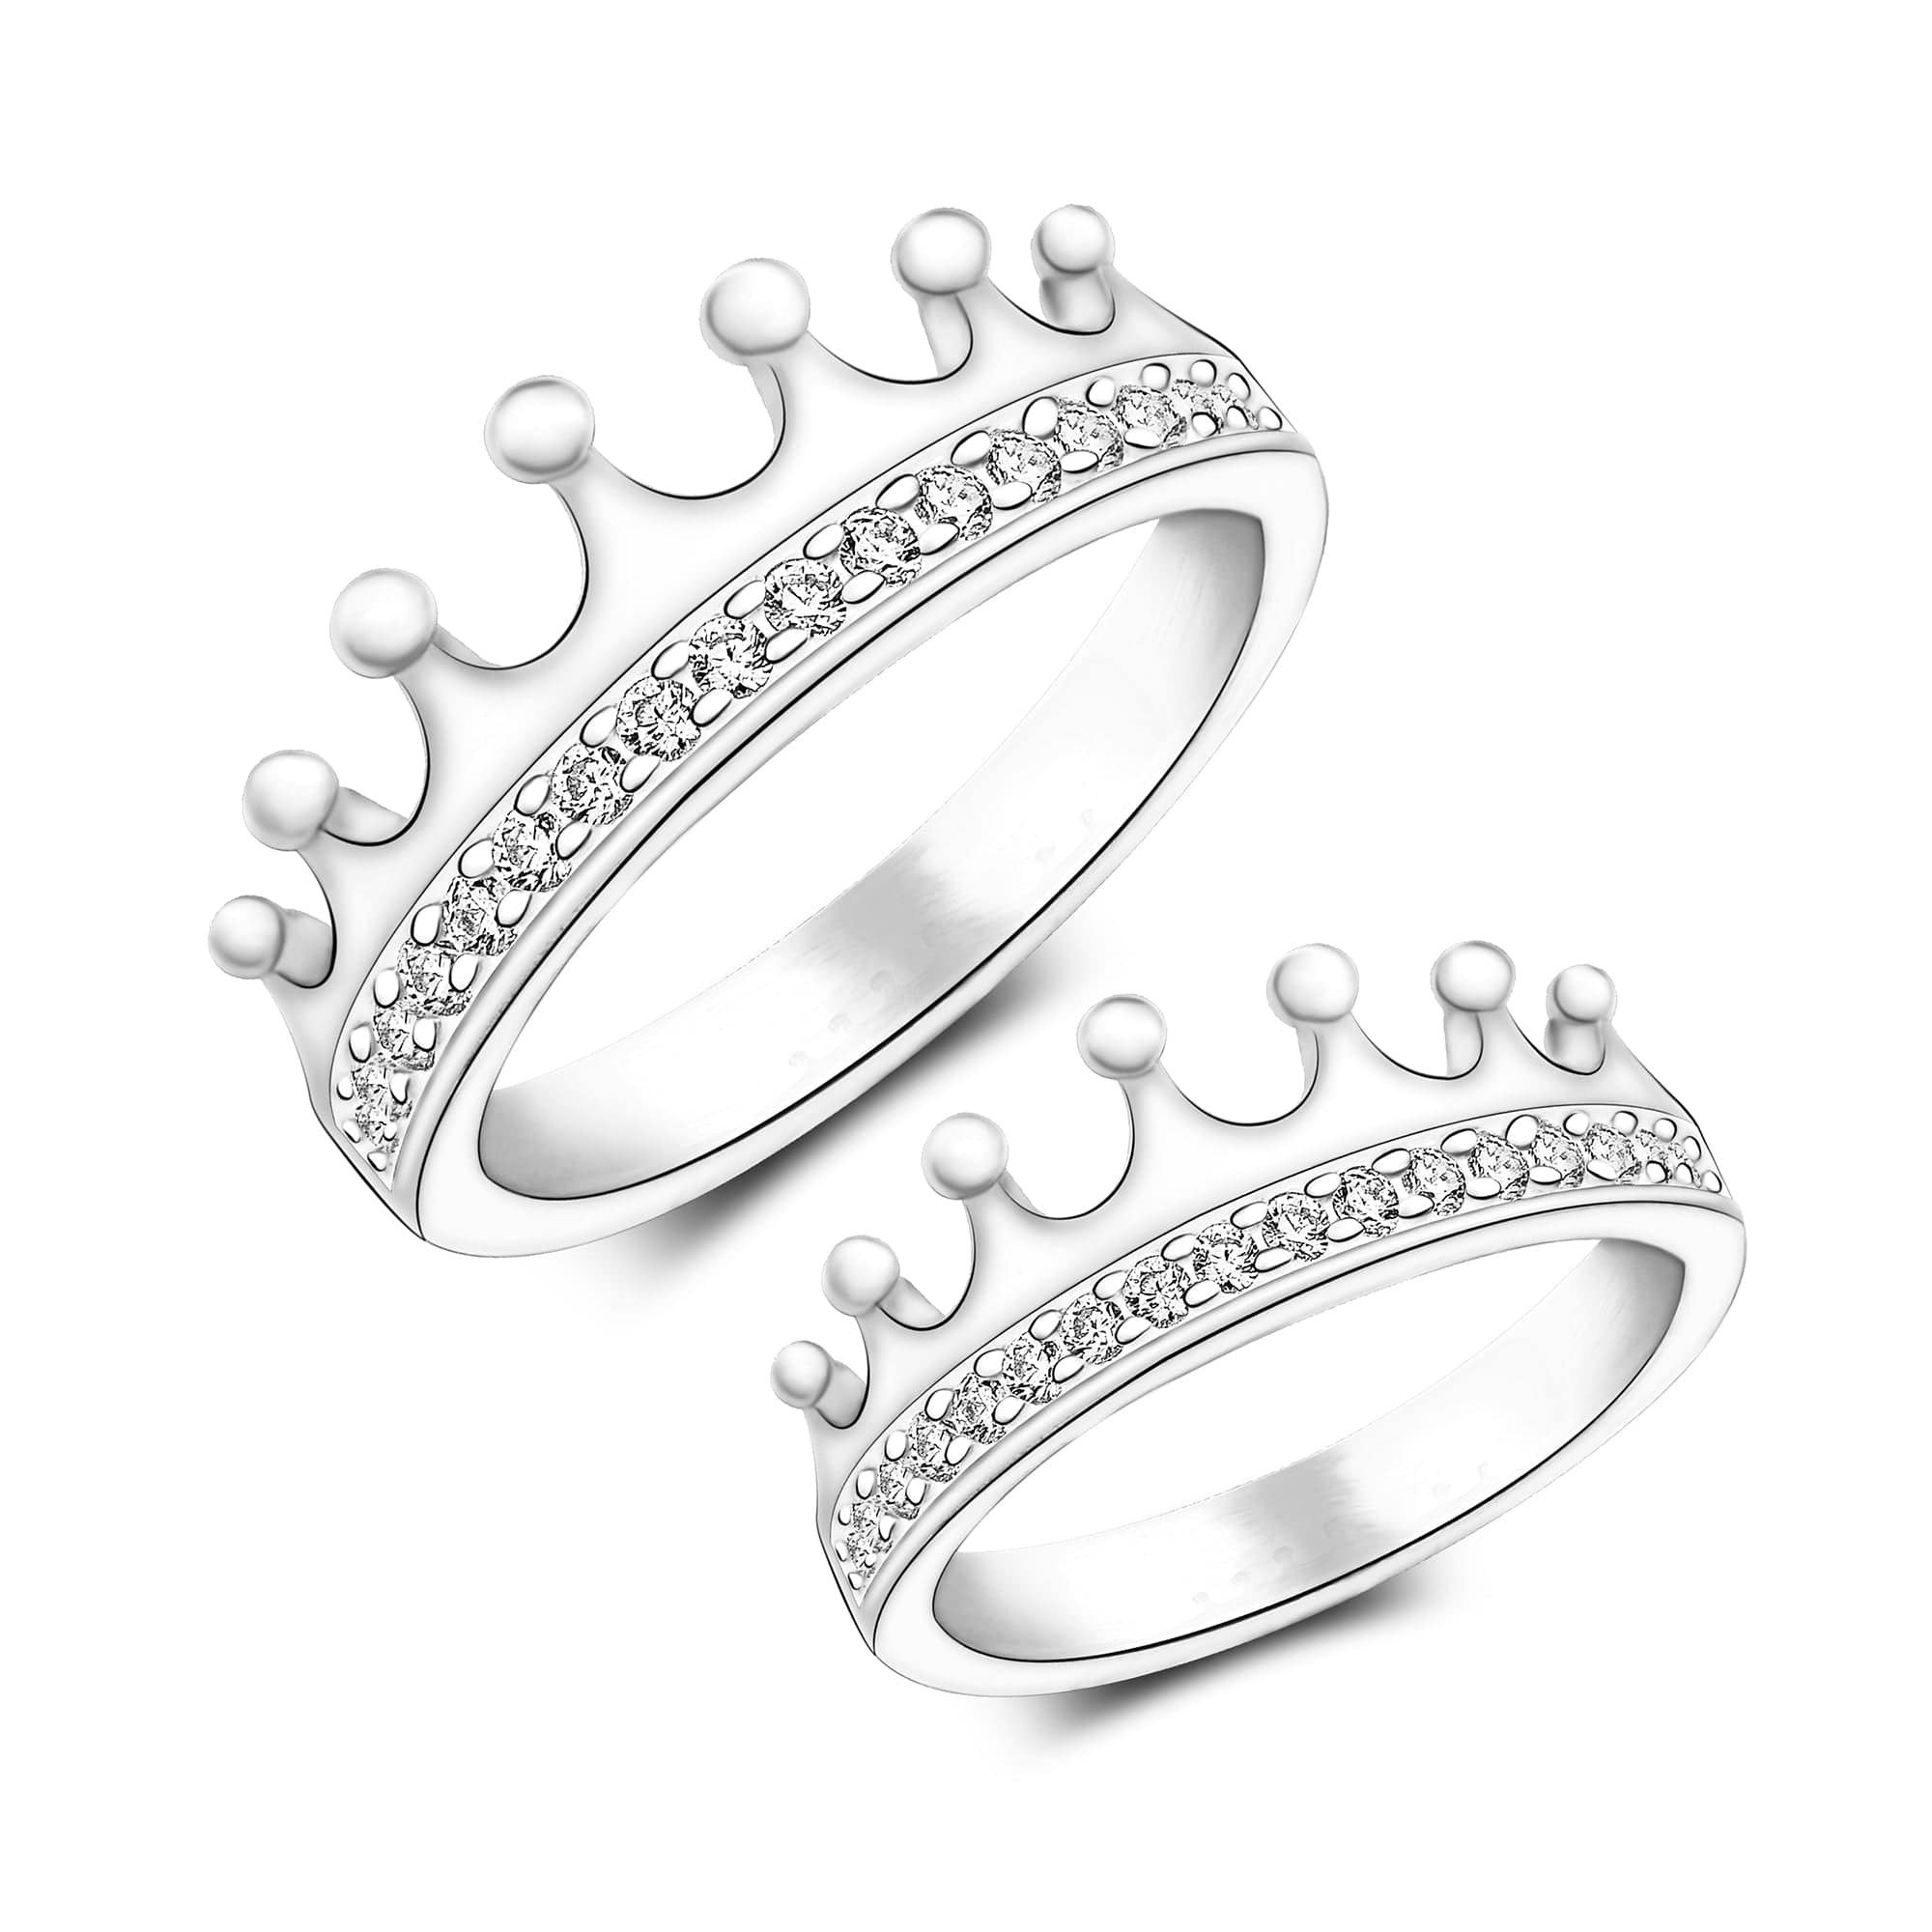 The Best Promise Ring Styles | With Clarity